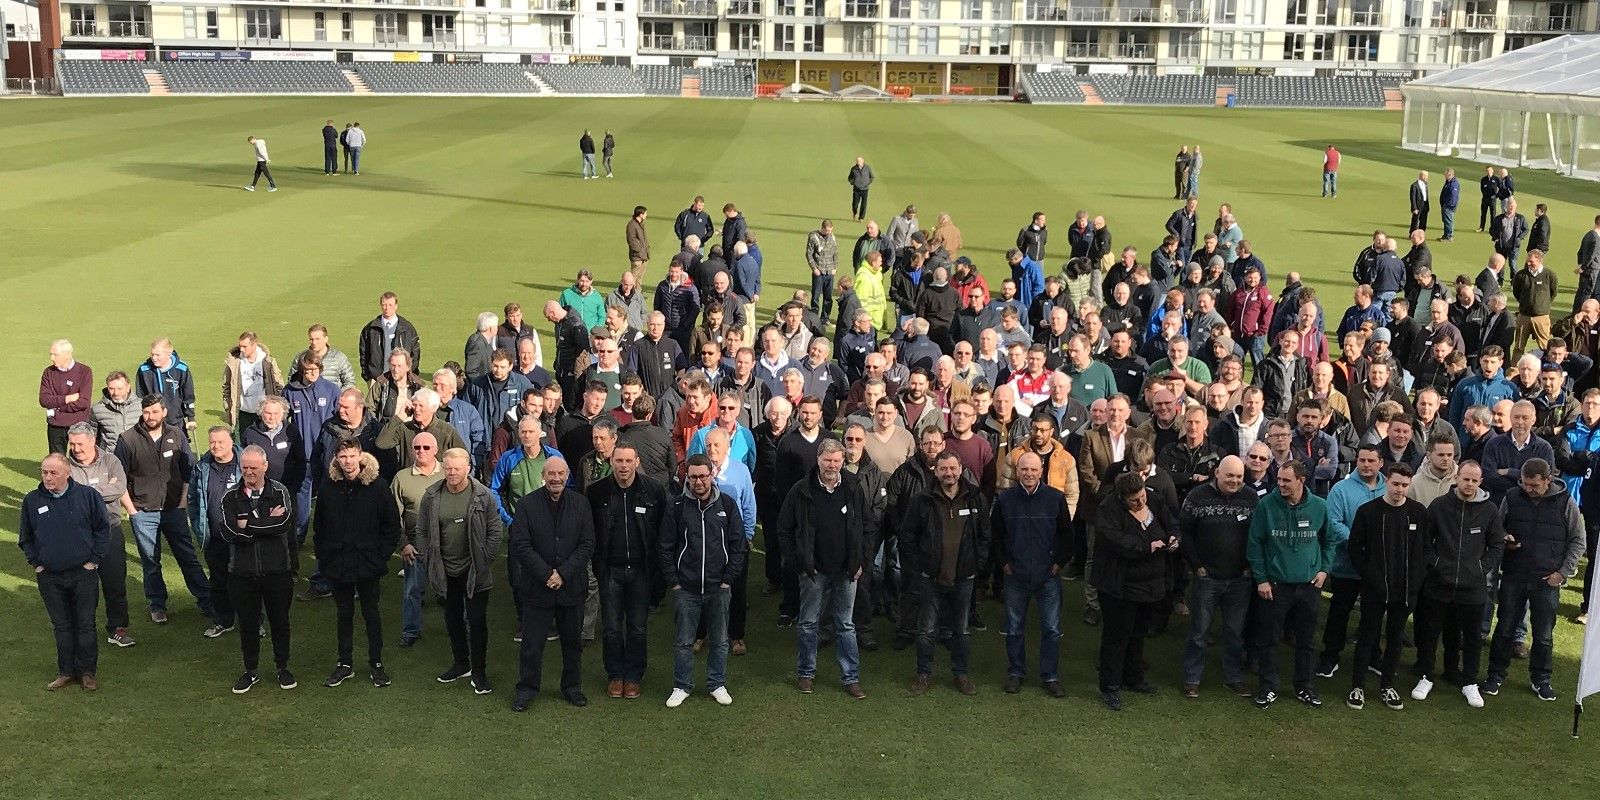 Video - 2017-Cricket-Groundsman's-Seminar-at-Gloucestershire-CCC-The-best-ever